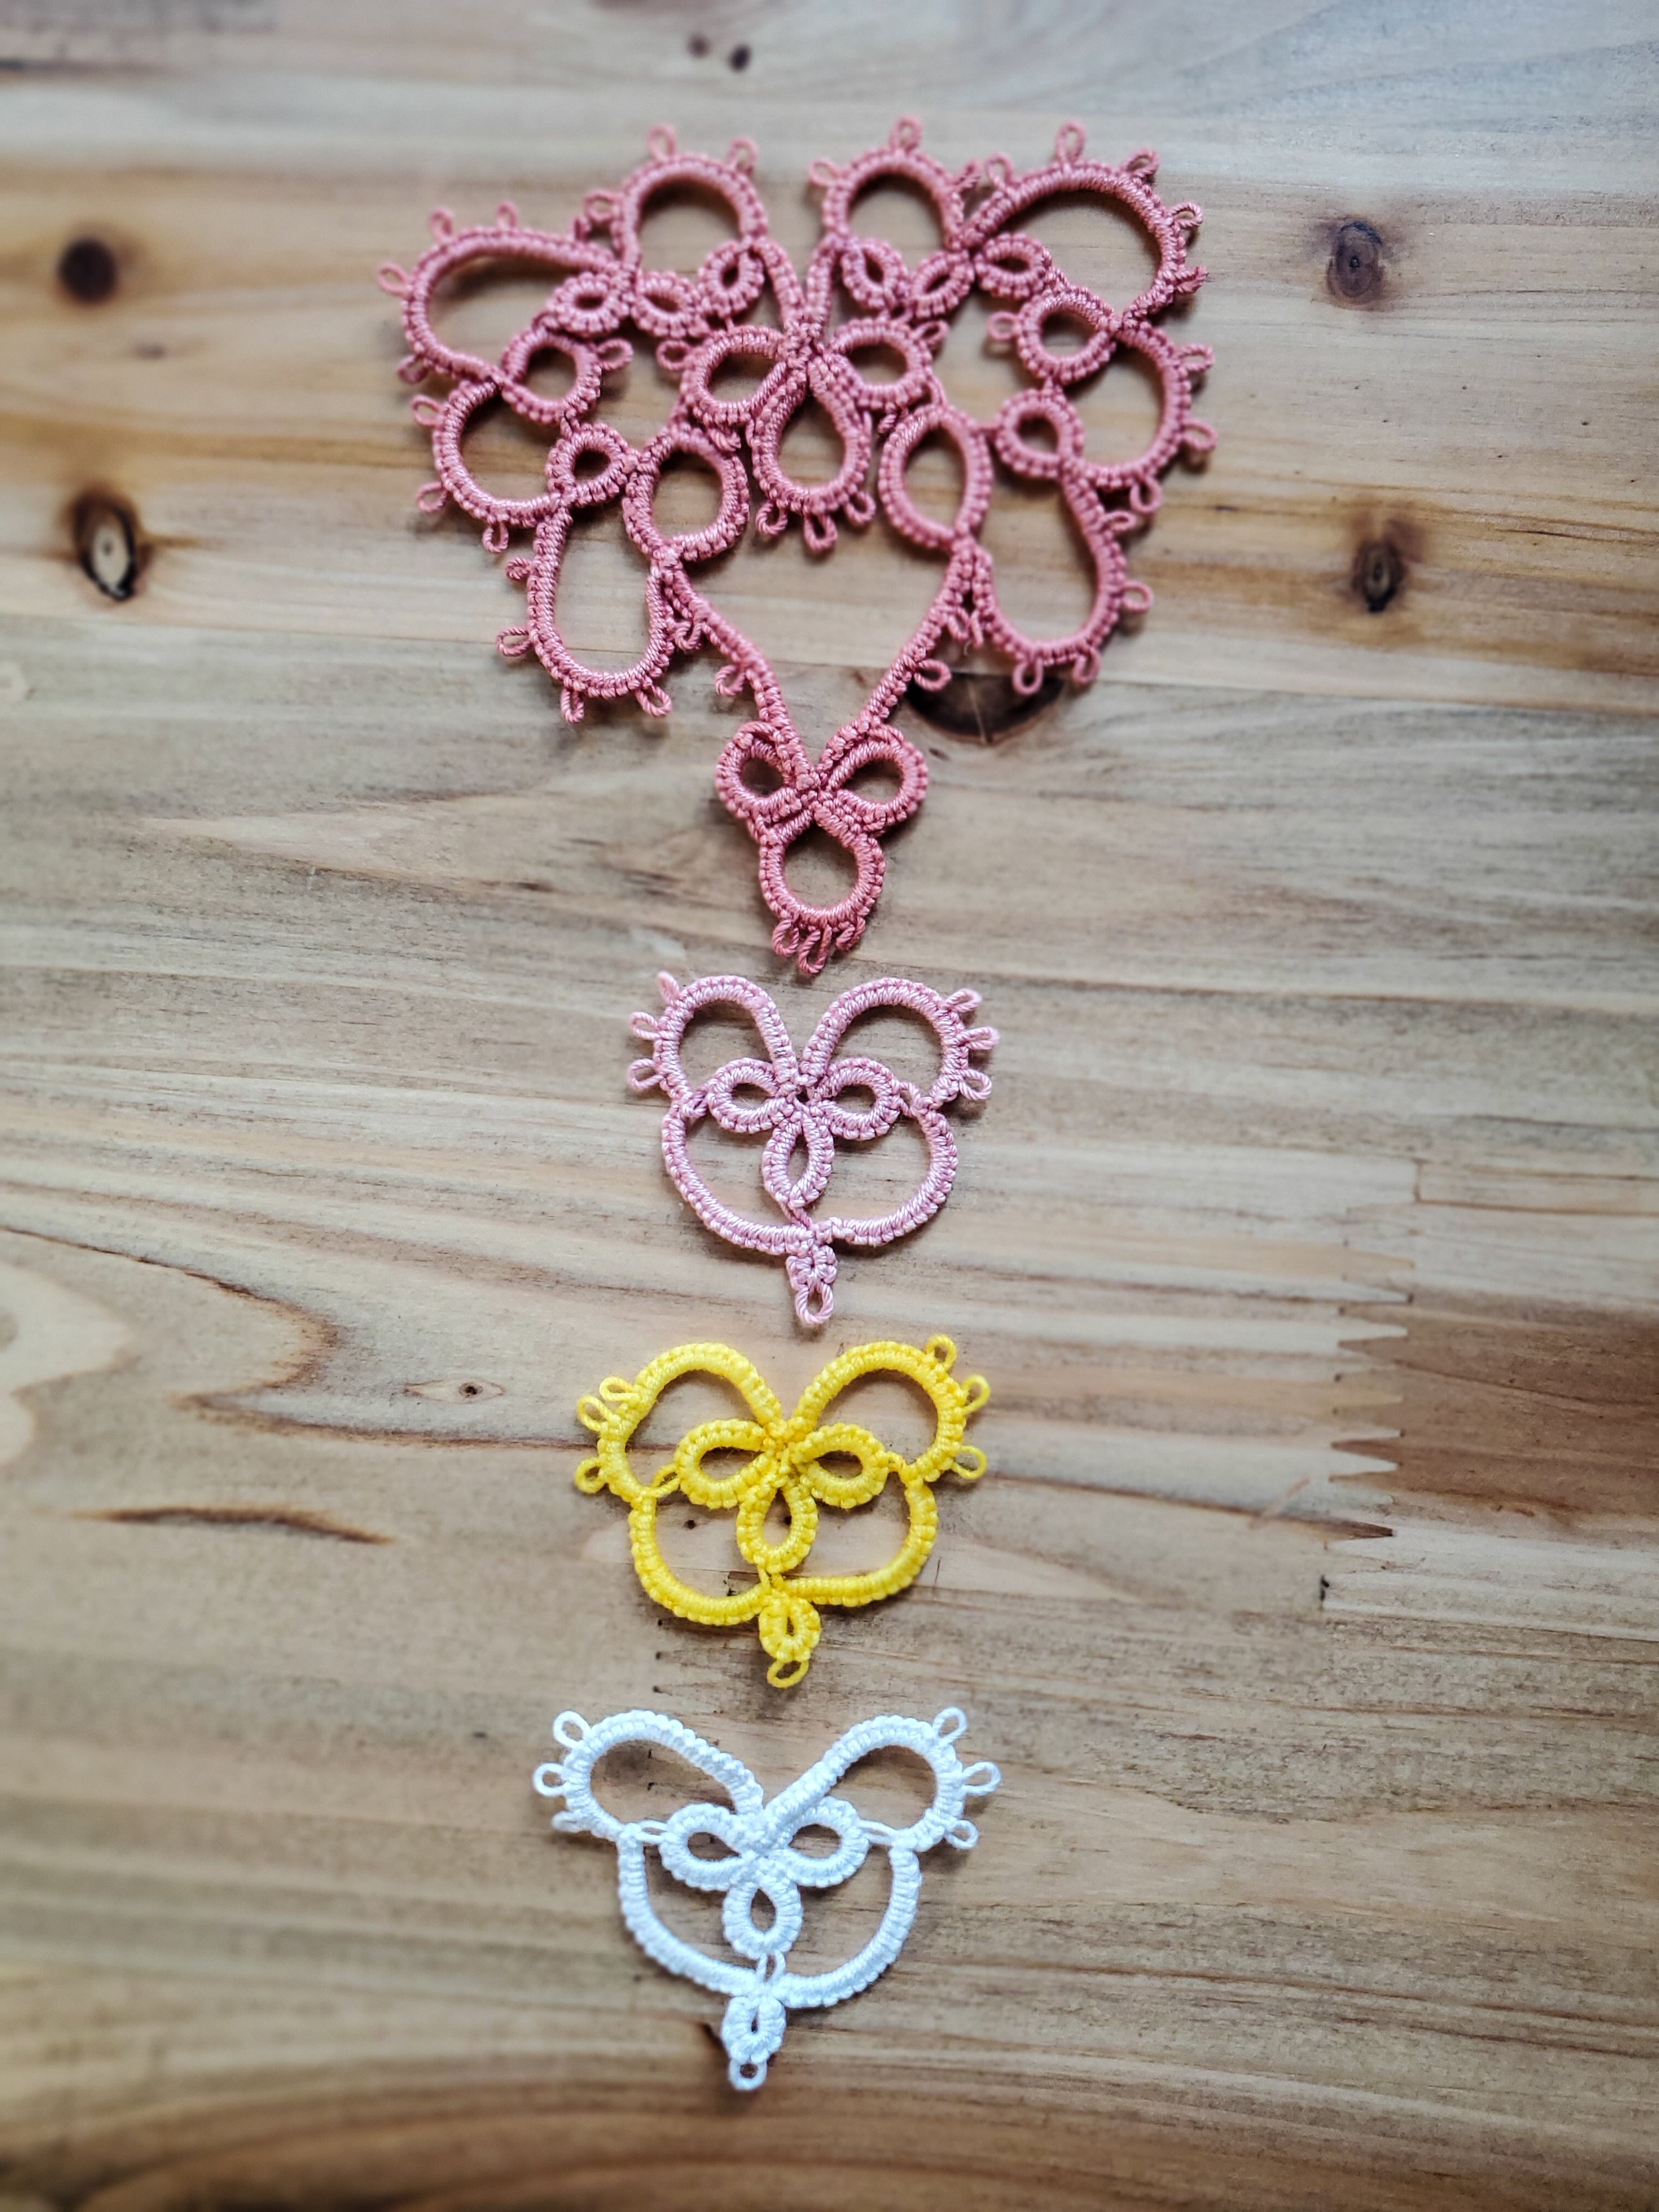 Thread Dyeing Small Tatting Projects (Full Tutorial & Recipes